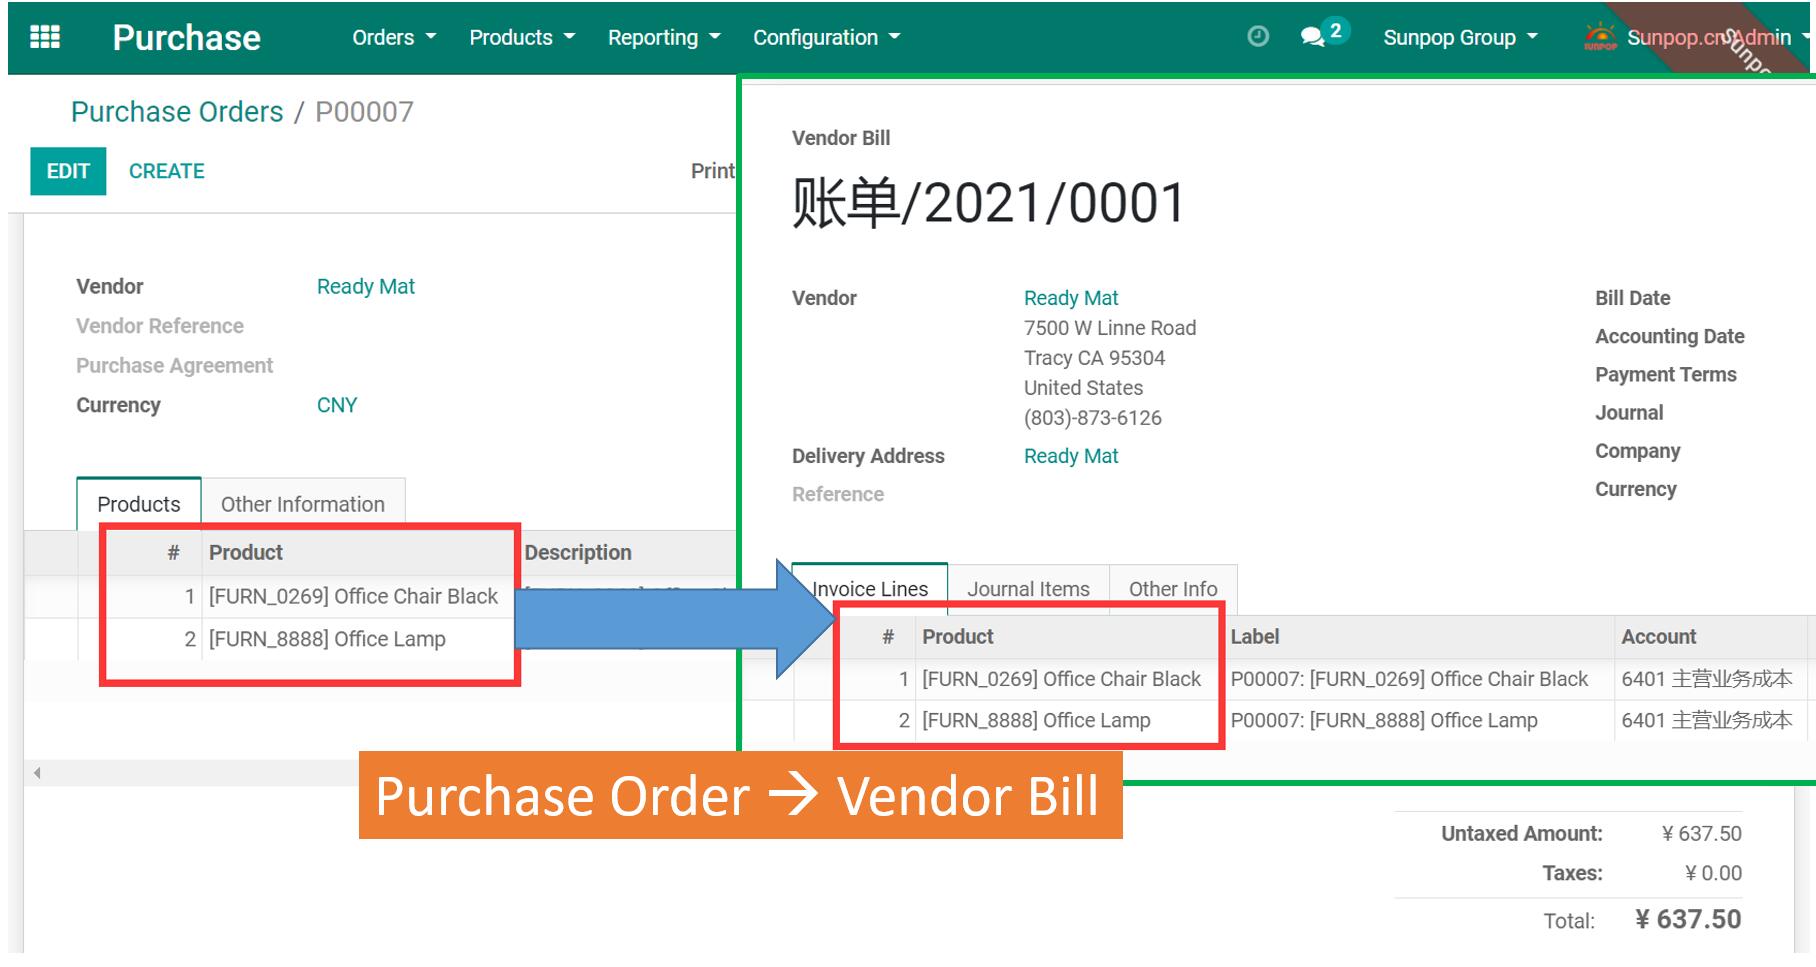 Purchase Requisition Line Number, Line Sequence